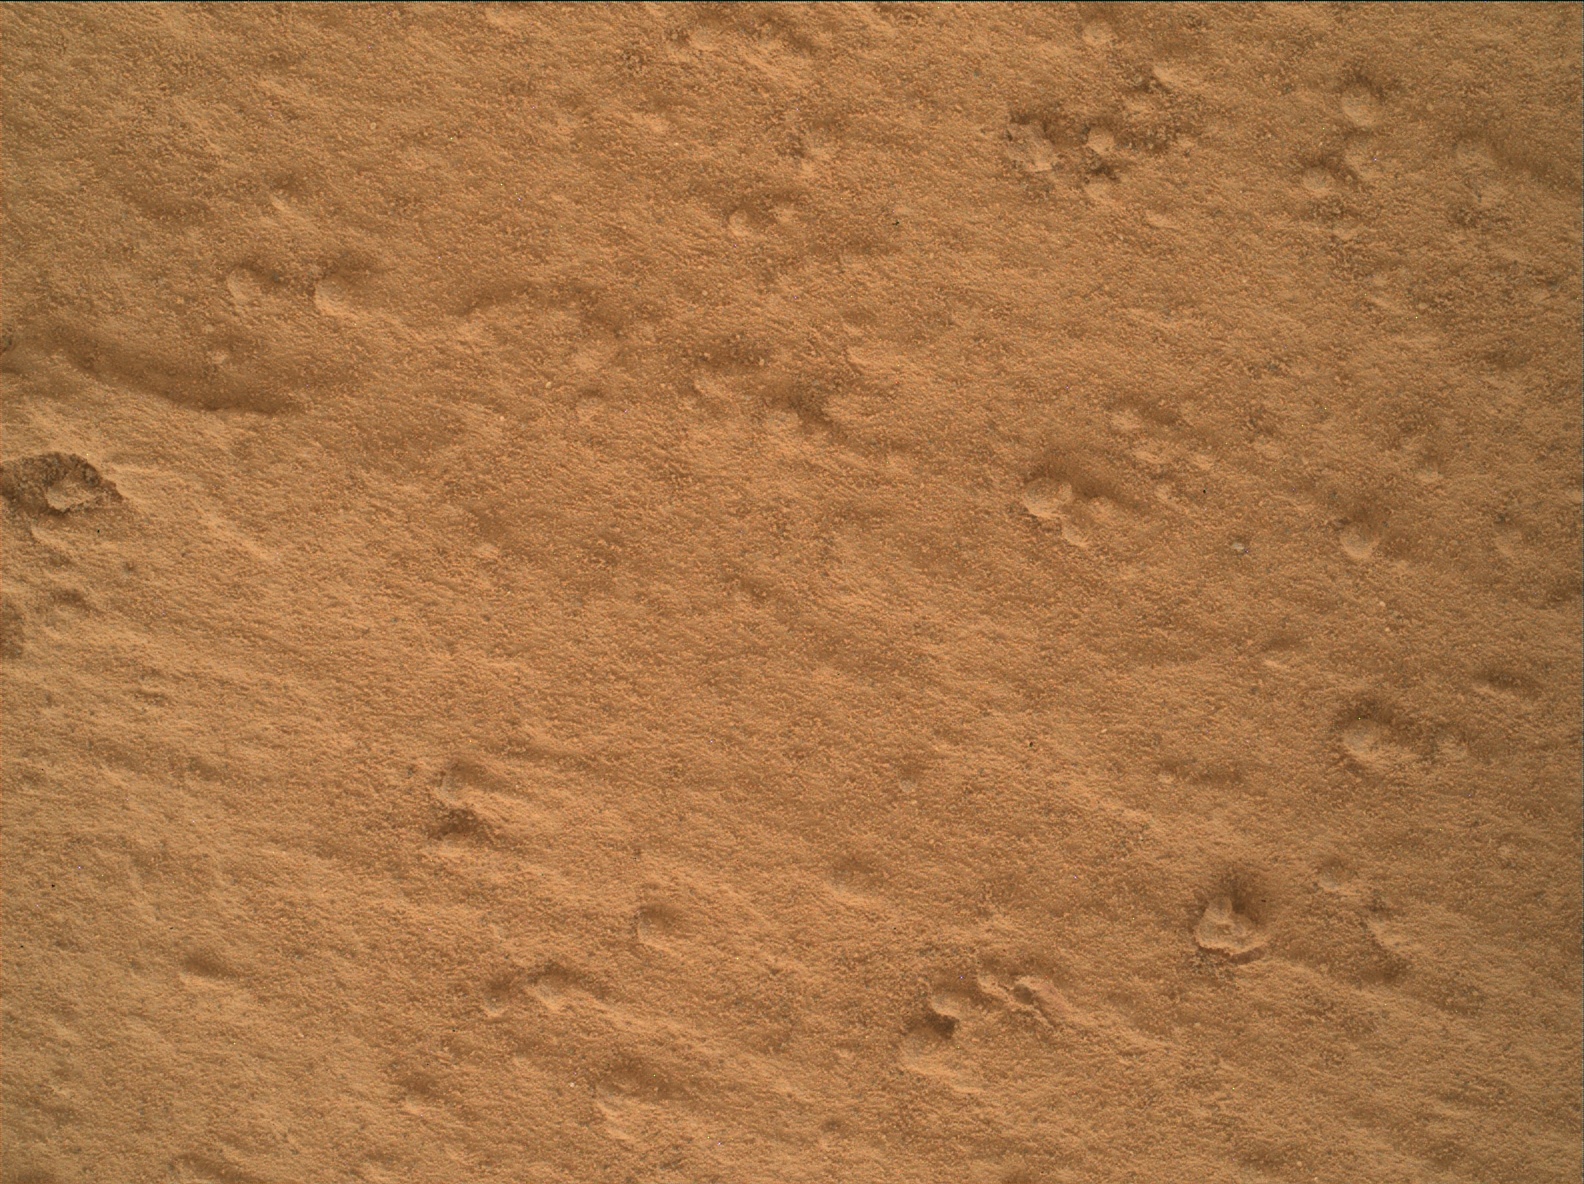 Nasa's Mars rover Curiosity acquired this image using its Mars Hand Lens Imager (MAHLI) on Sol 3472